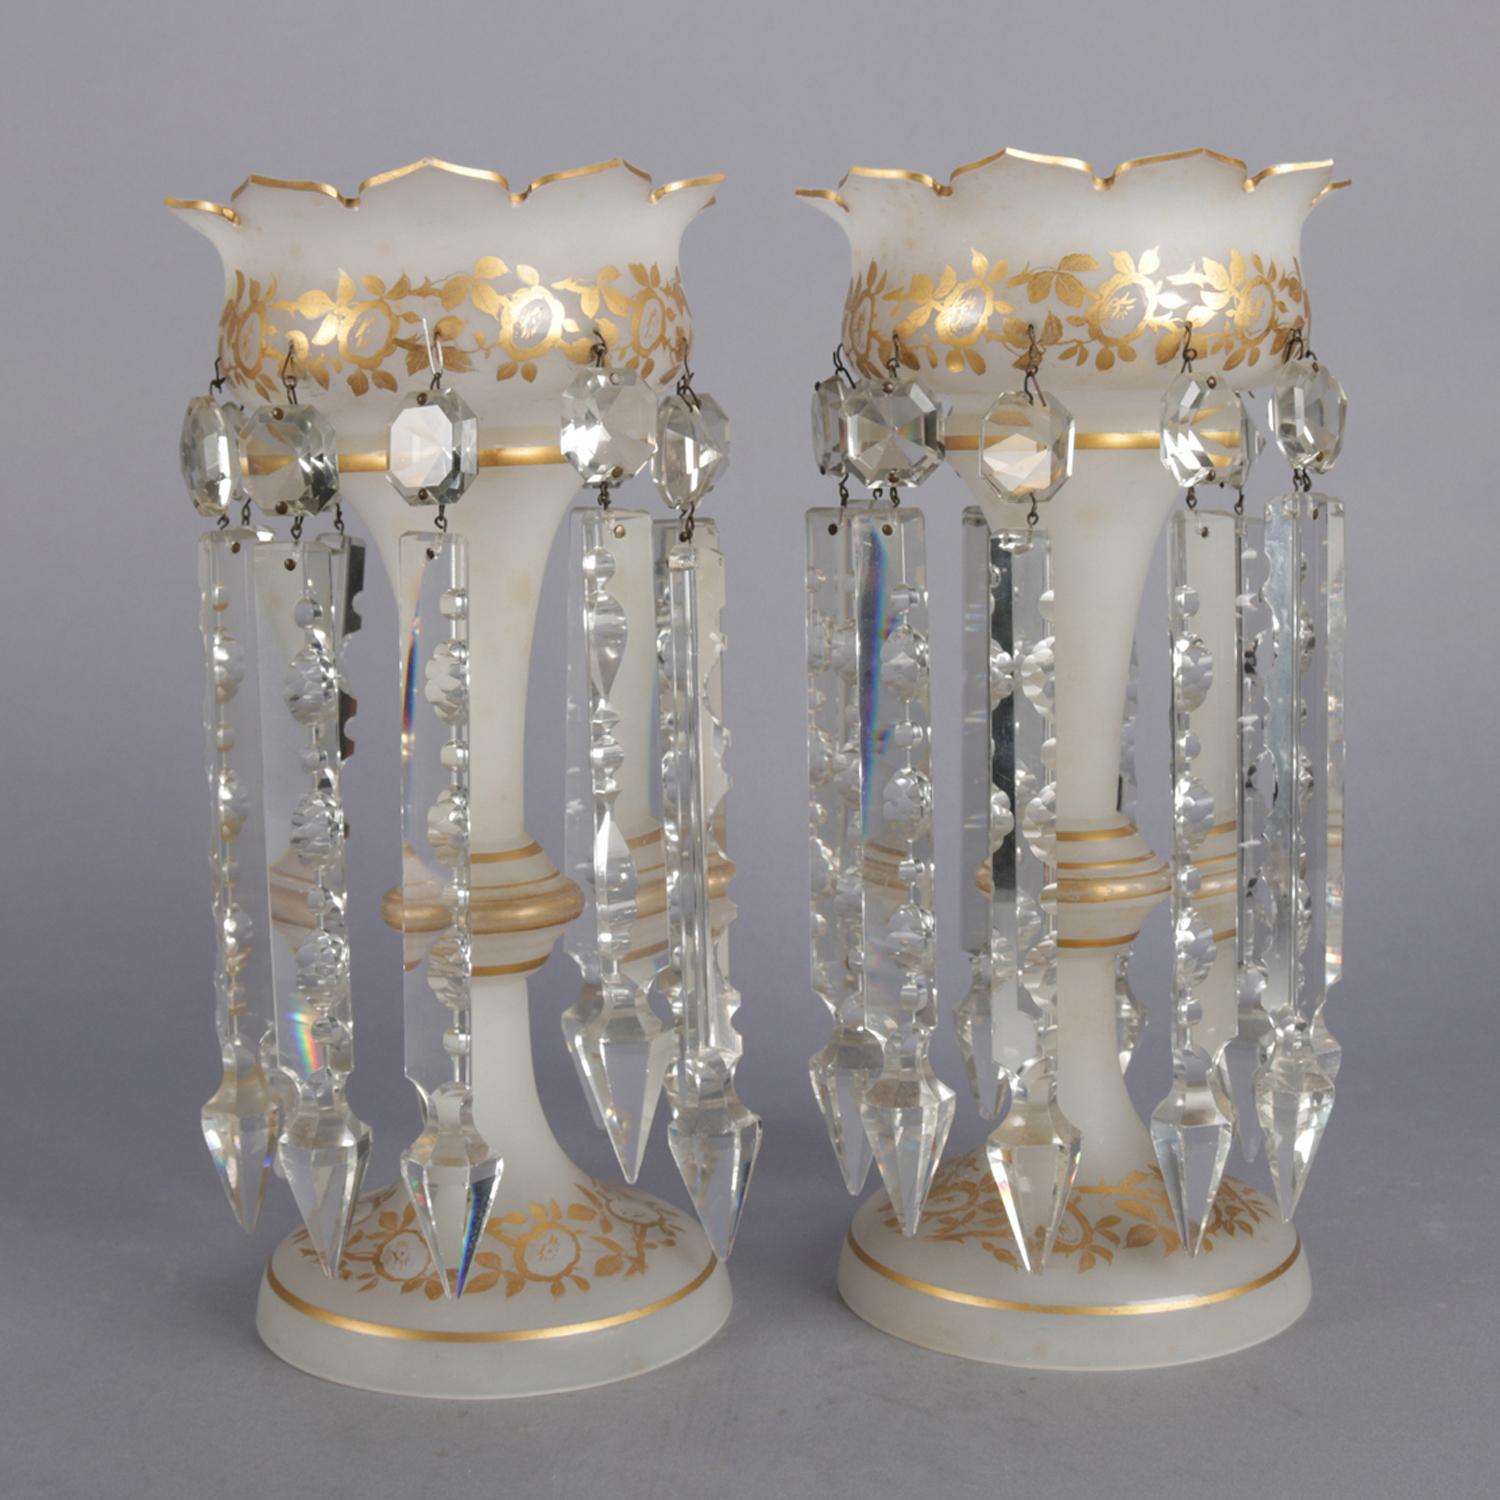 Pair of Victorian Gilt Frosted Glass and Cut Crystal Mantel Lustres with Prisms 1